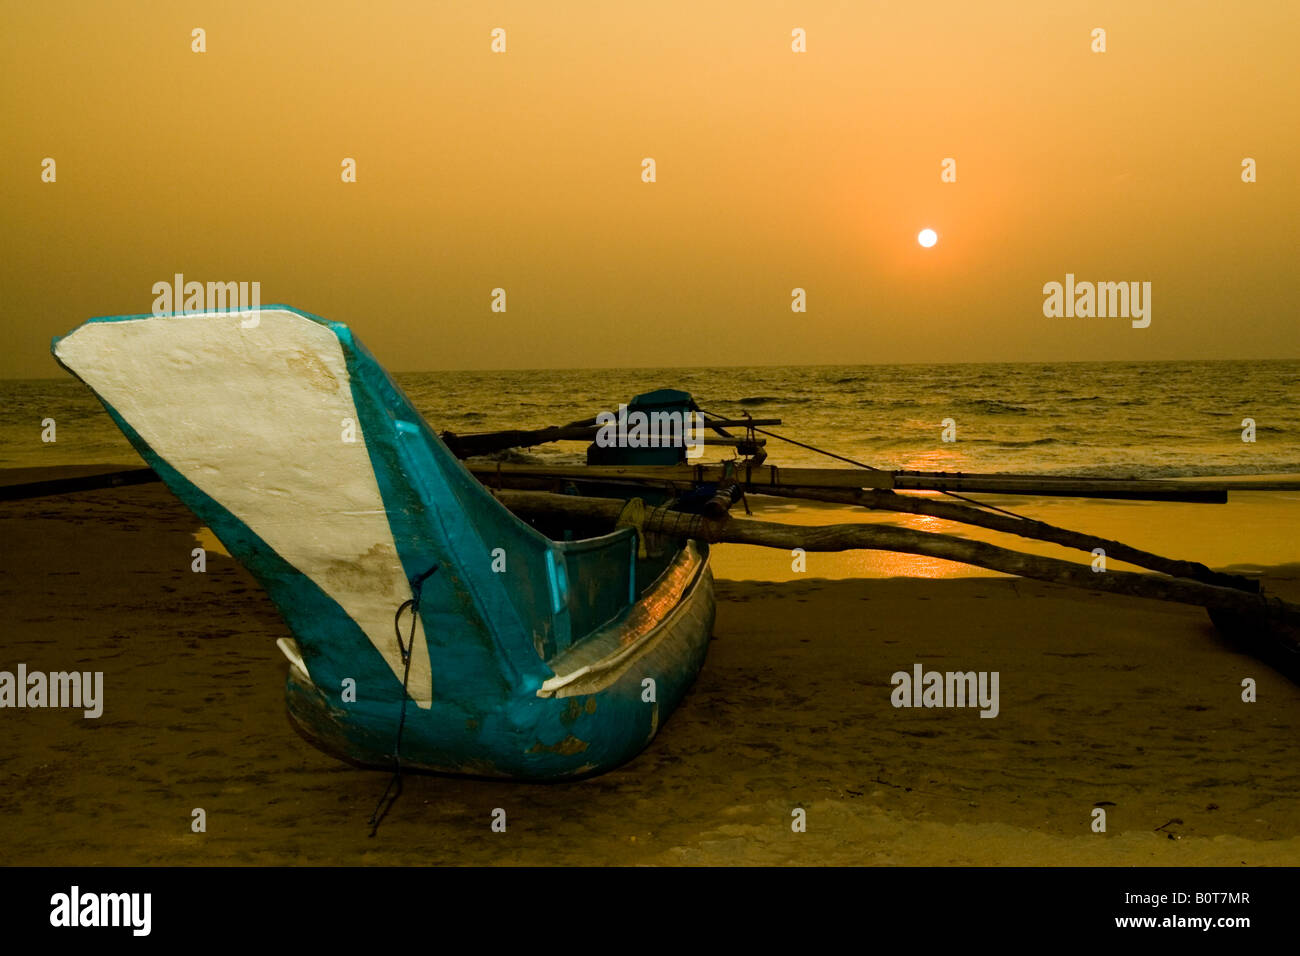 Outriger on beach in Sri Lanka at sunset Stock Photo